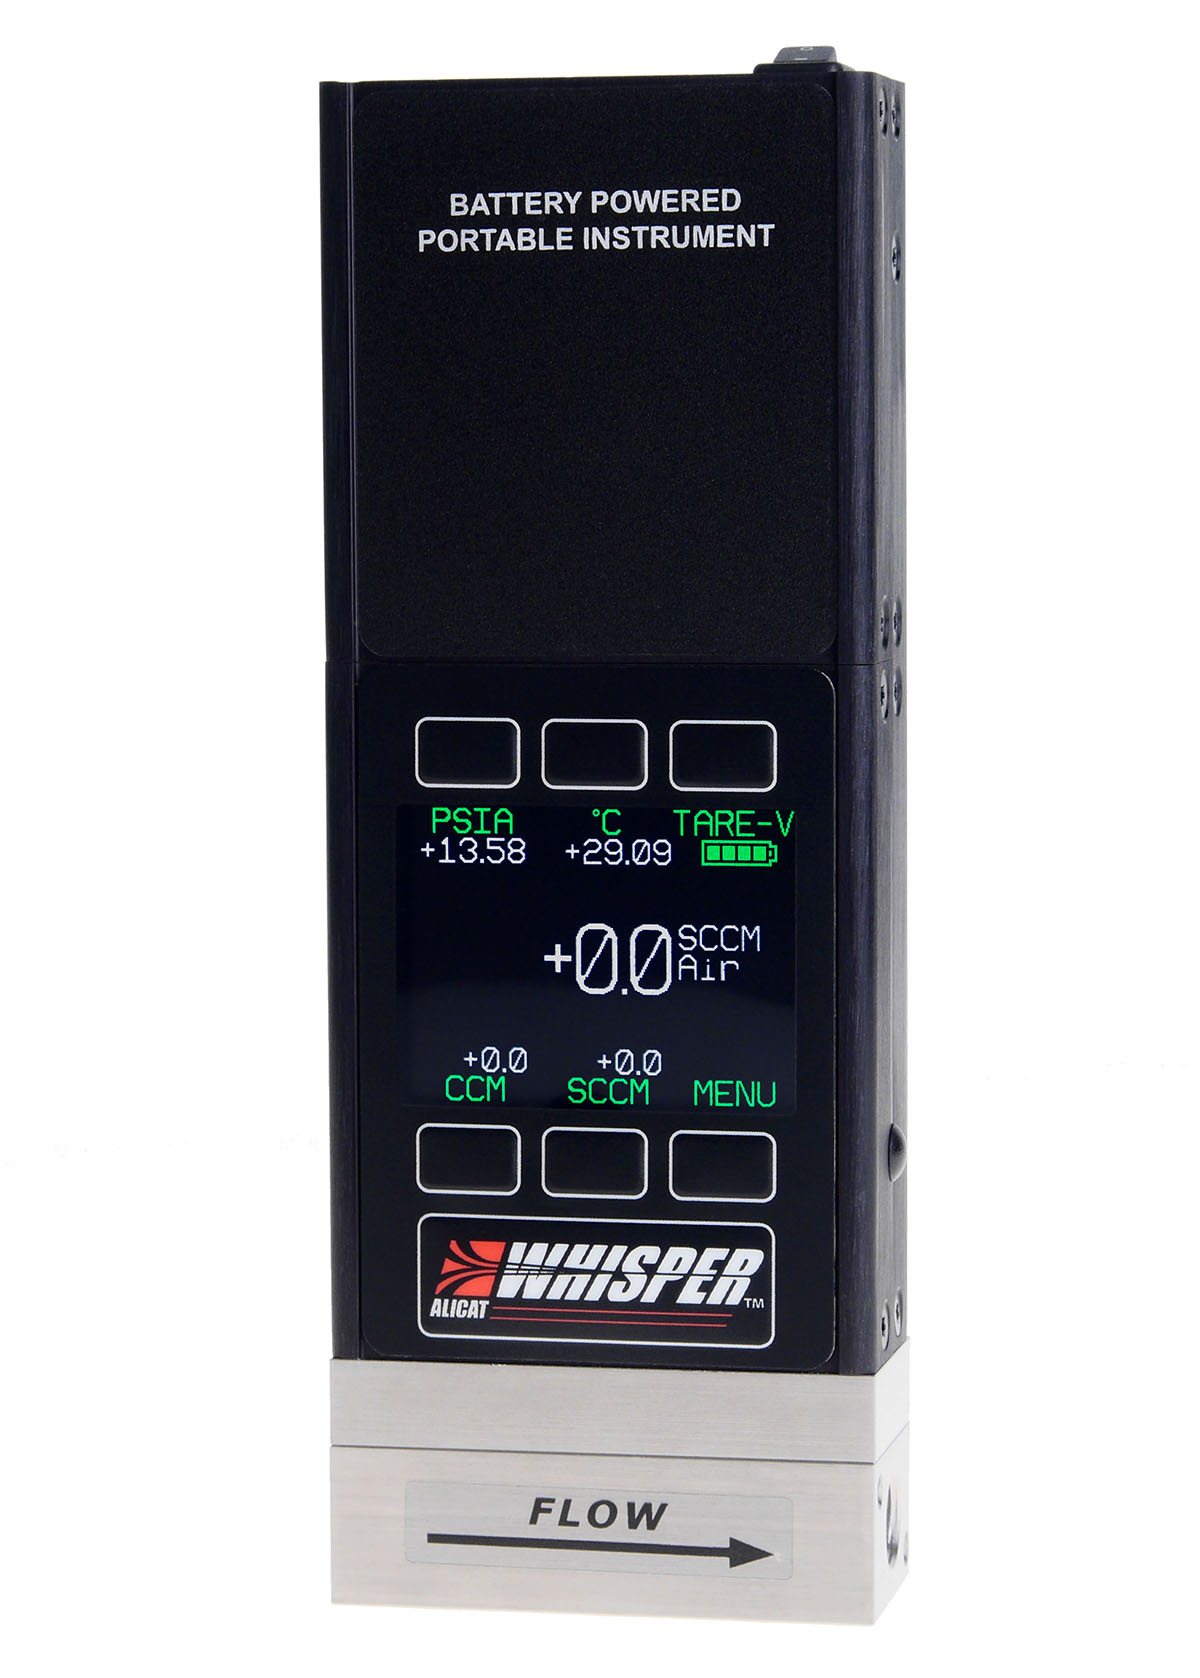 Portable mass flow calibrator with optional backlit color display from Alicat